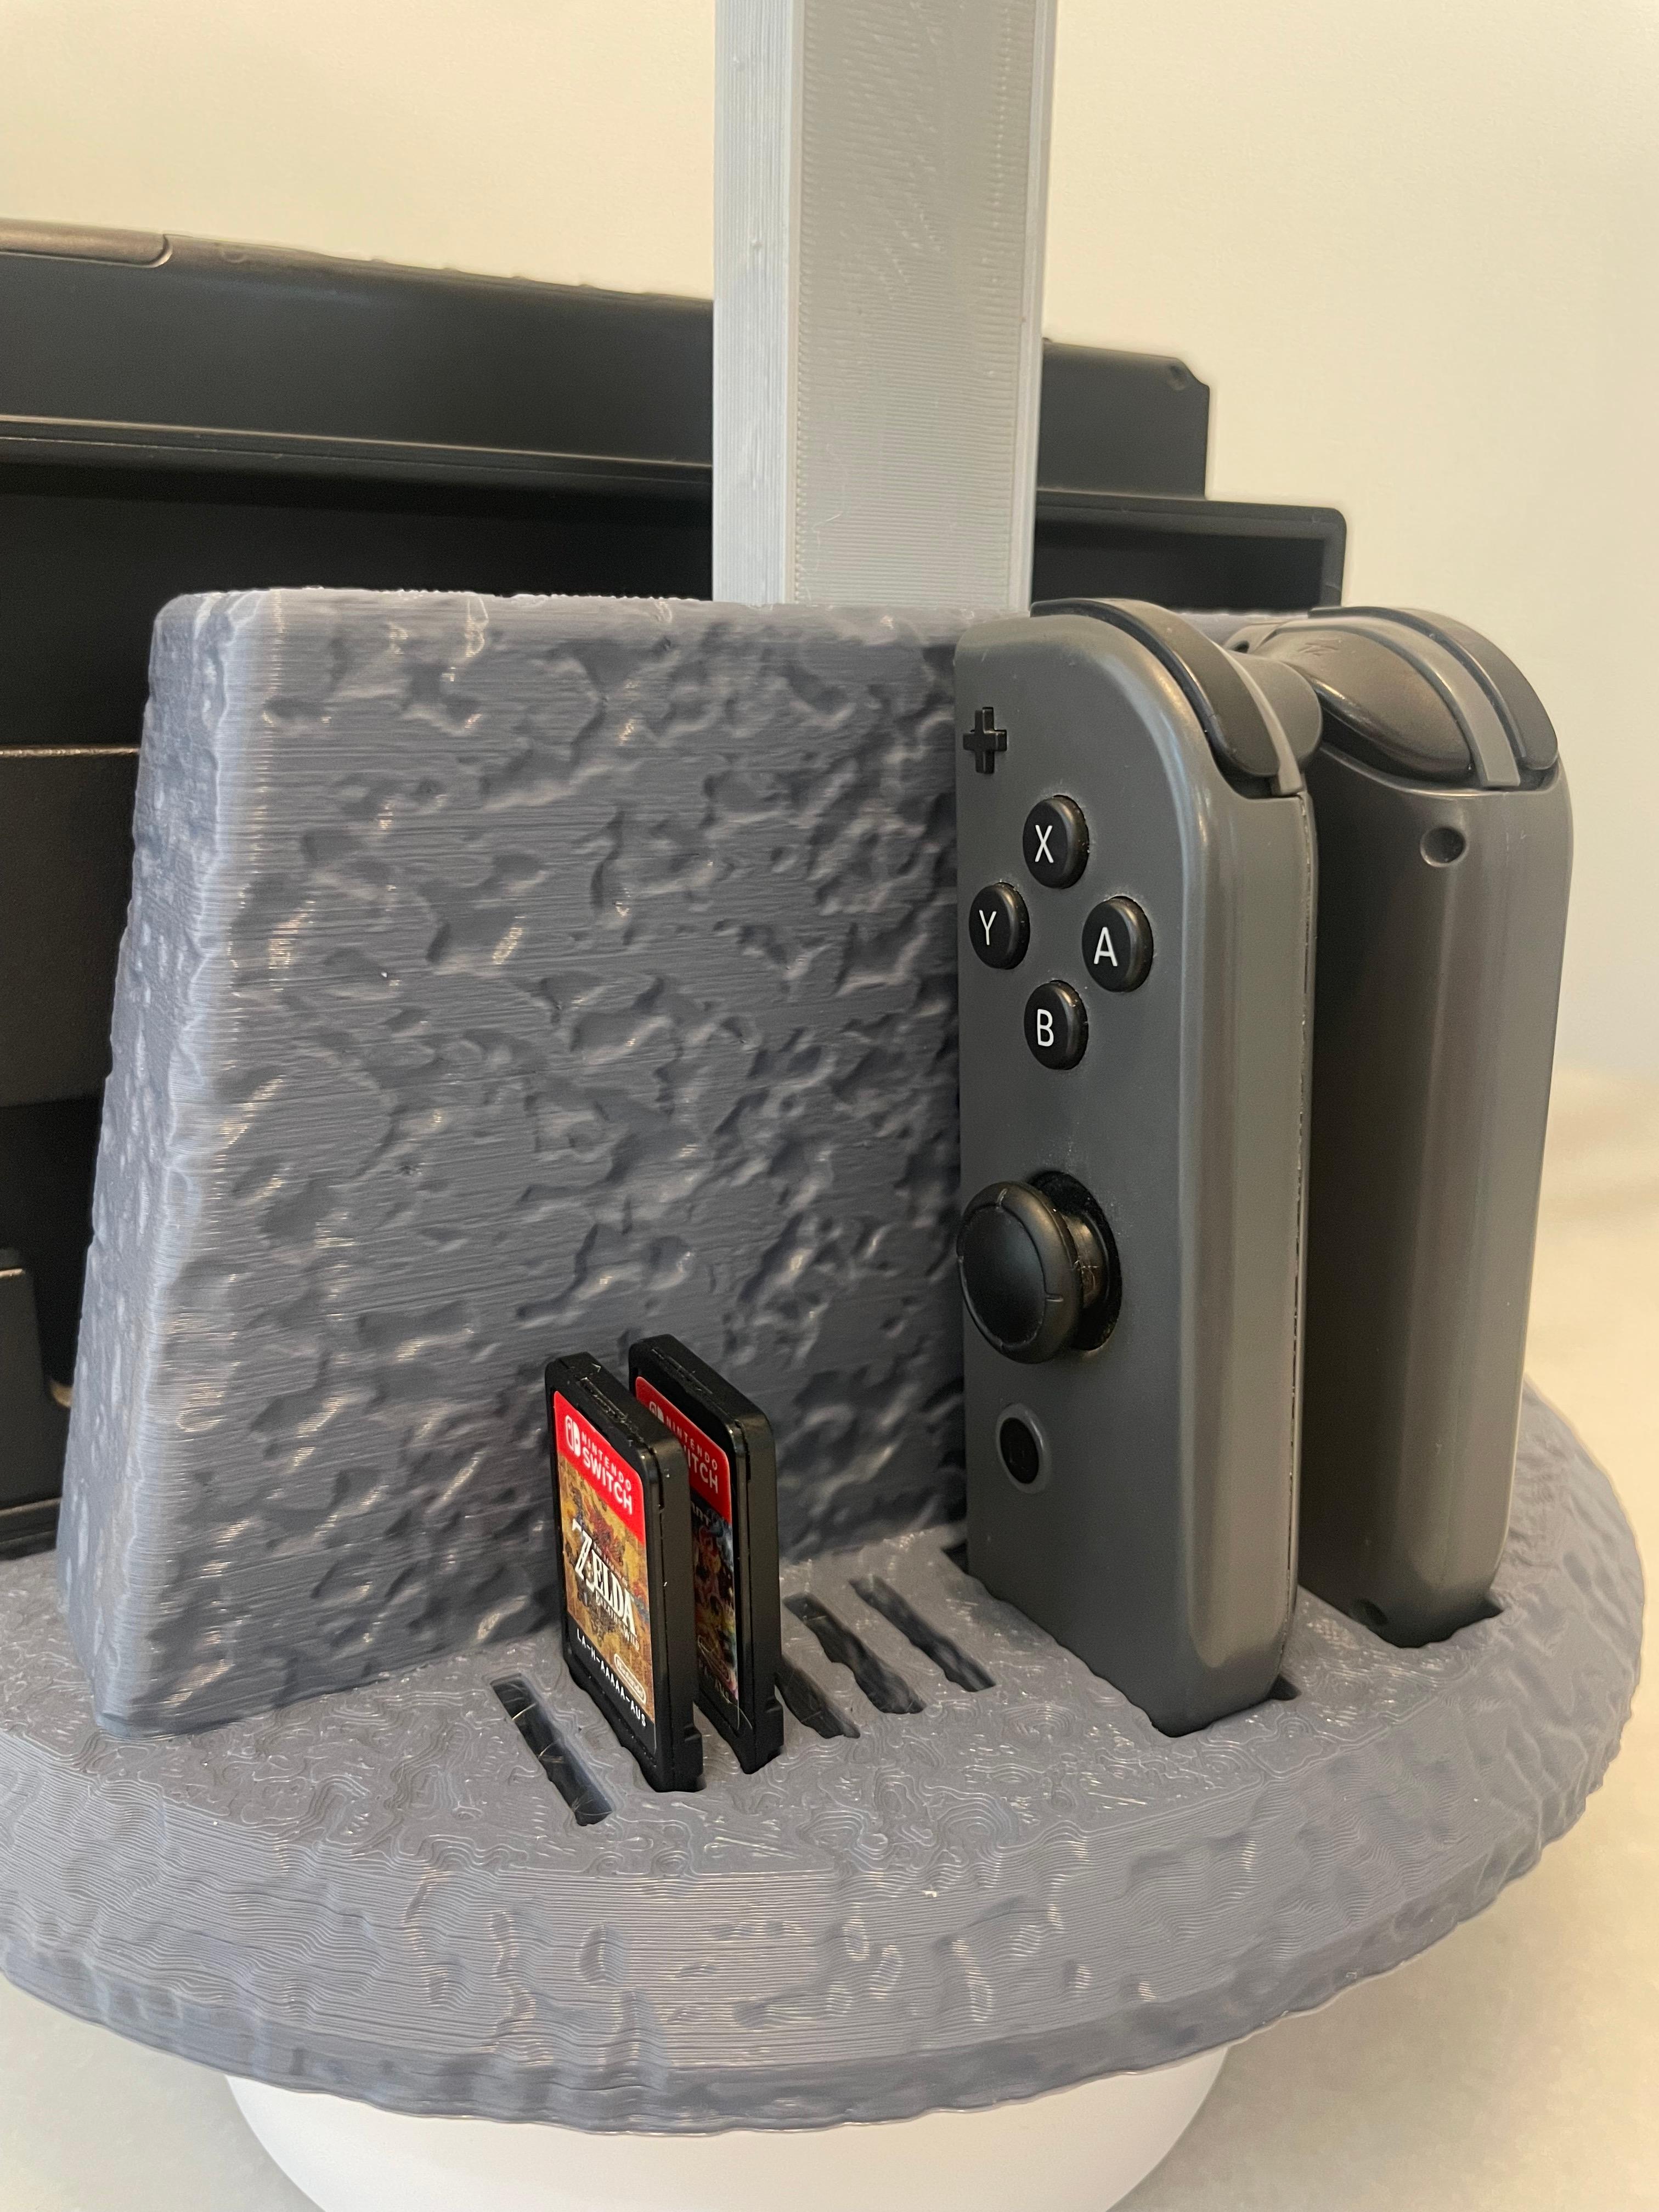 SWITCH DOCK WITH REMOVABLE MASTER SWORD 3d model